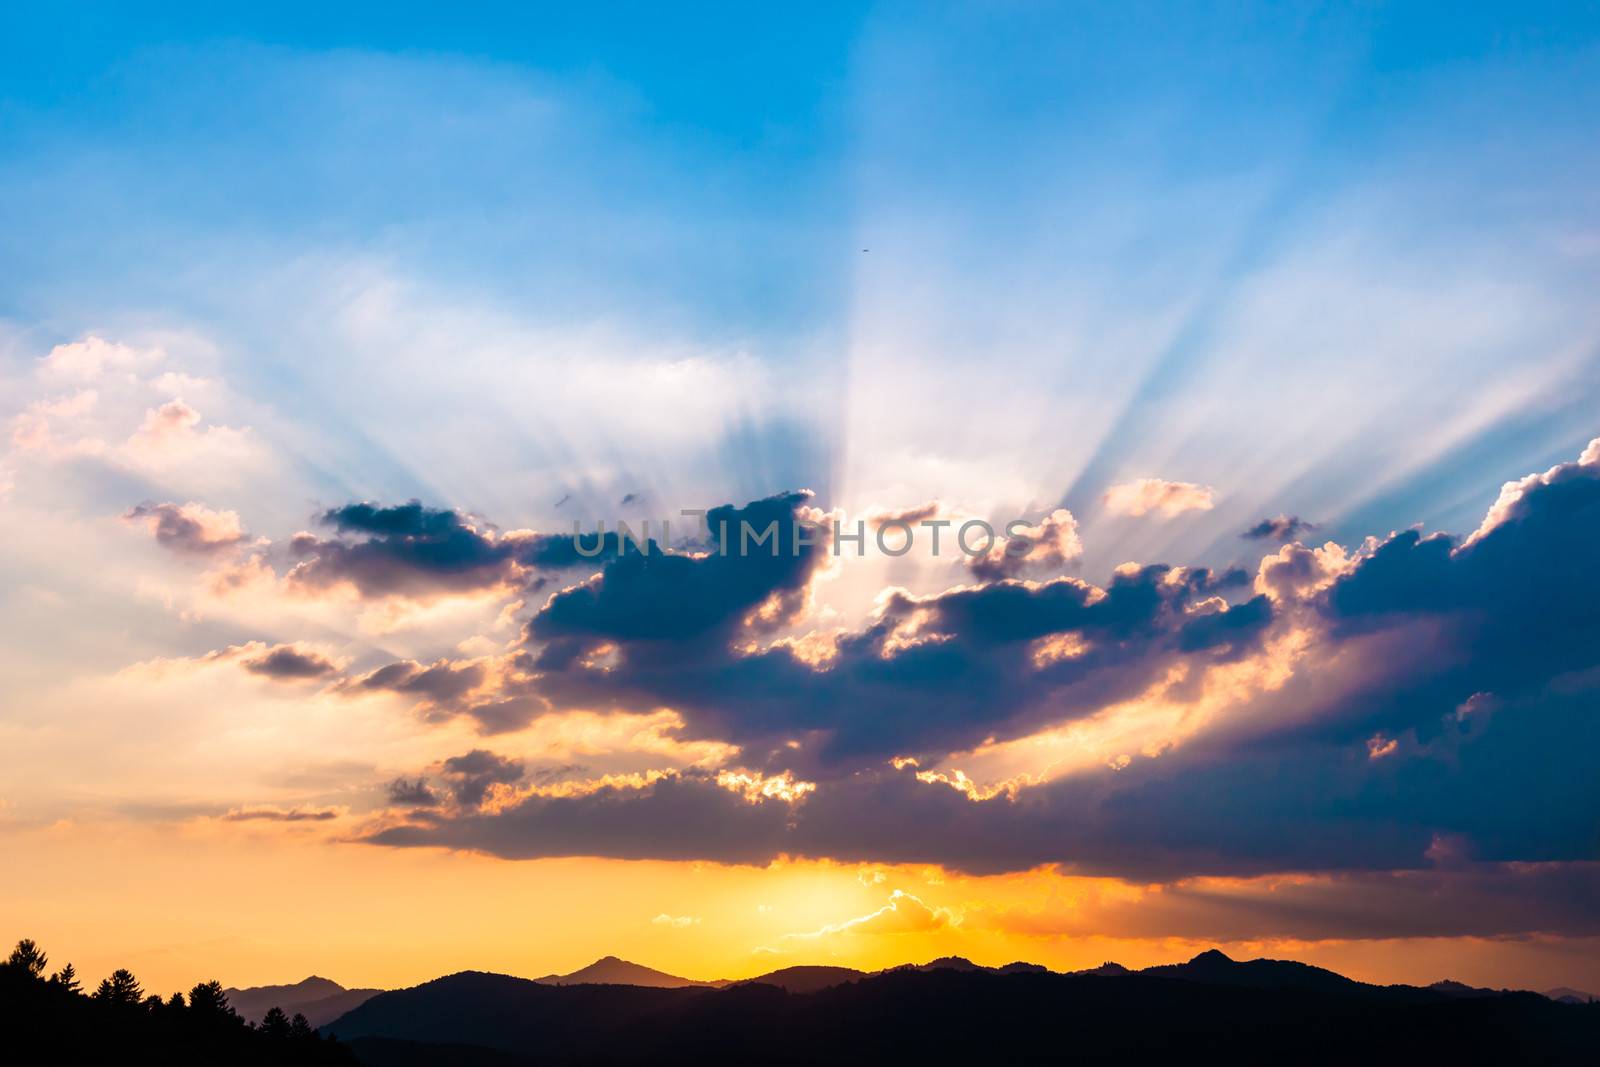 Sunset / sunrise with clouds, light rays and other atmospheric effect over the hills and mountains in Slovenia, Europe.